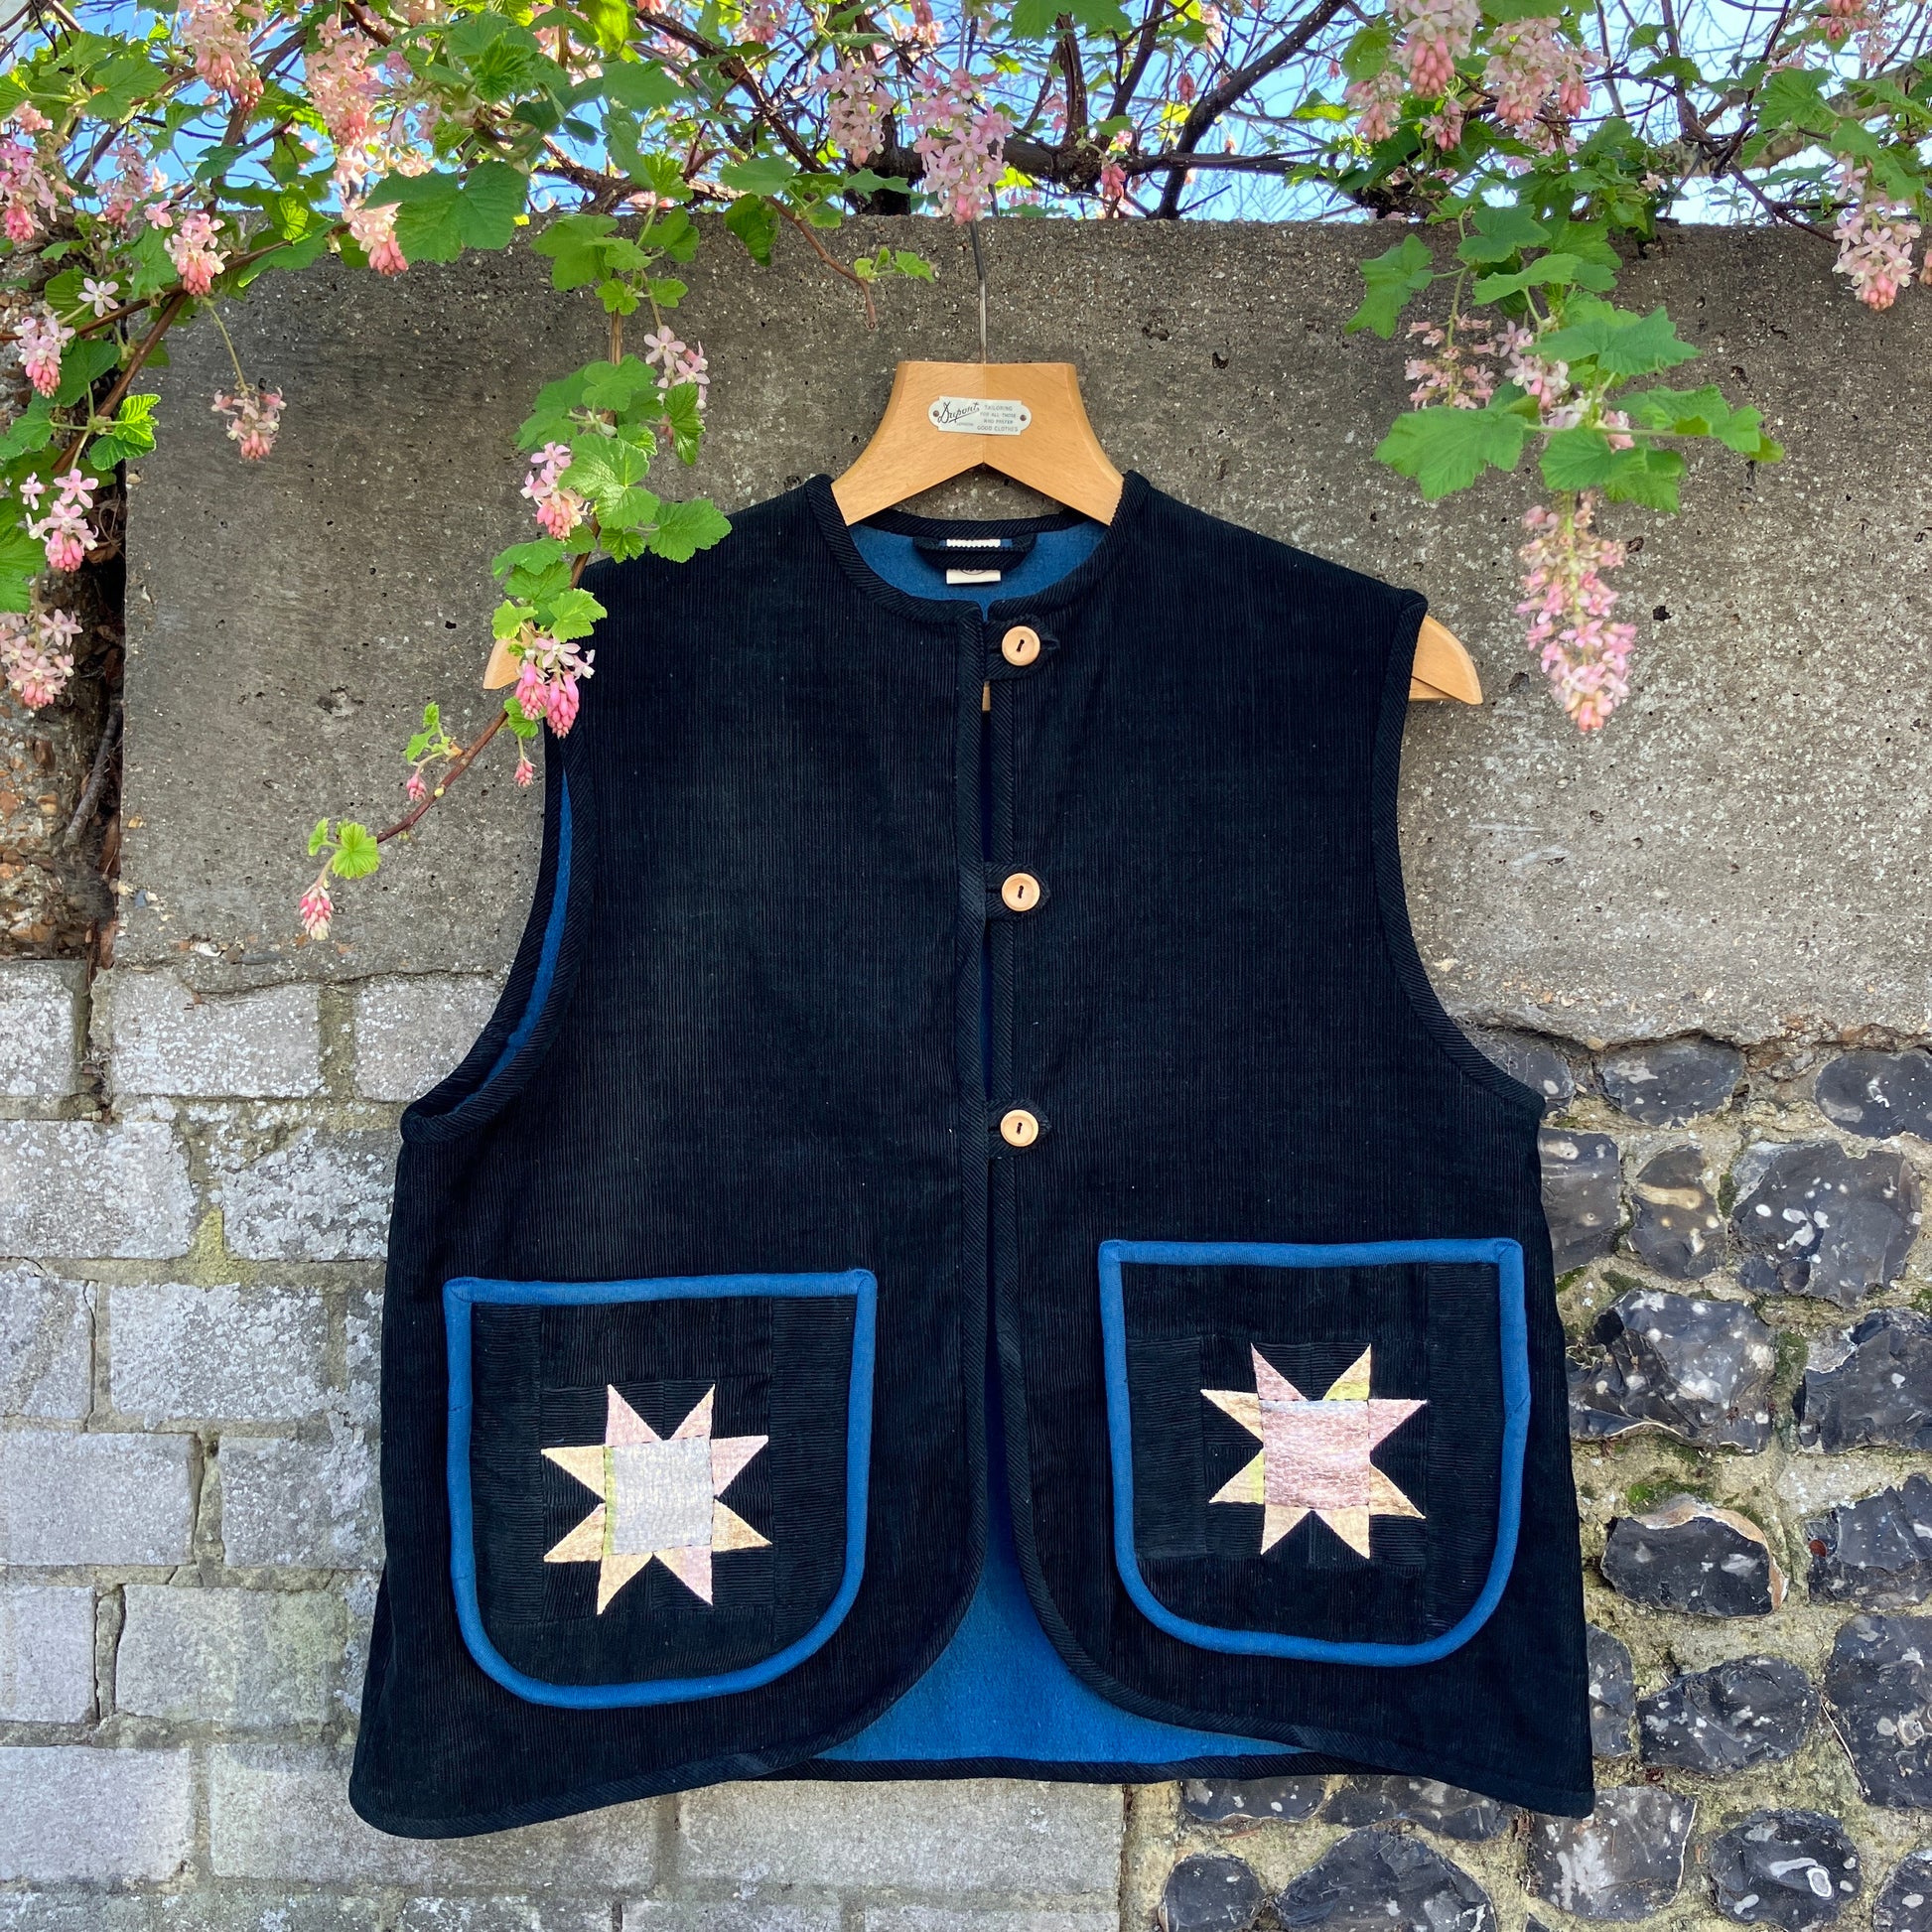 Needlecord vest/gilet/waistcoat with large hand quilted patchwork pockets in gold and silver lamé with blue binding.  Finished with wooden buttons and a hanging loop. Pictured hanging against a wall with spring blossom overhanging